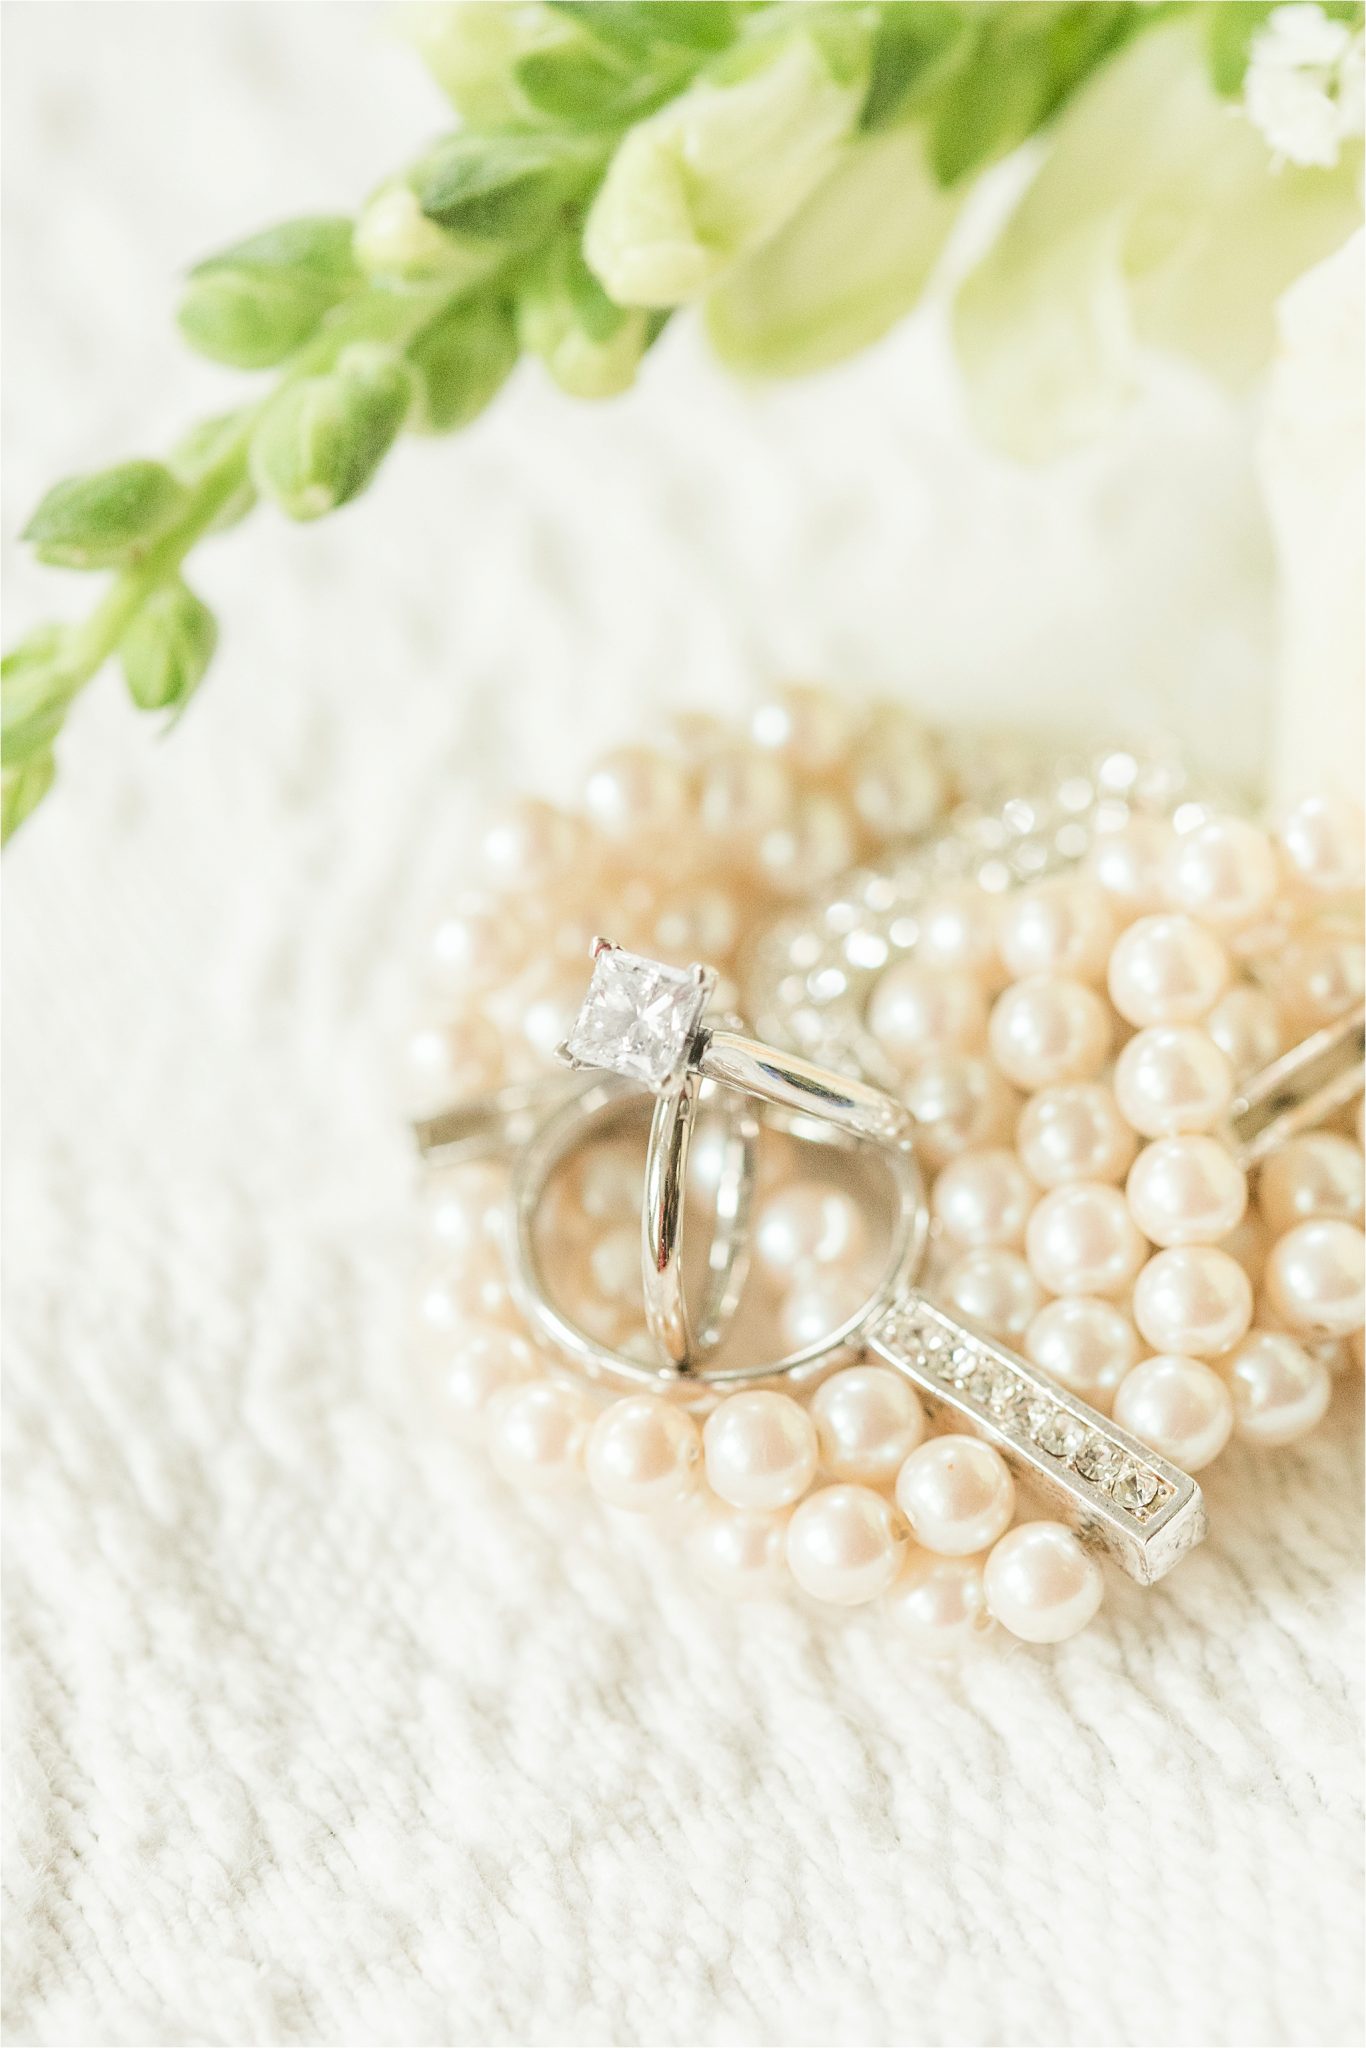 Princess cut wedding ring-white gold engagement ring-bride and groom ring shot-pearl wedding details-one carrot wedding rings